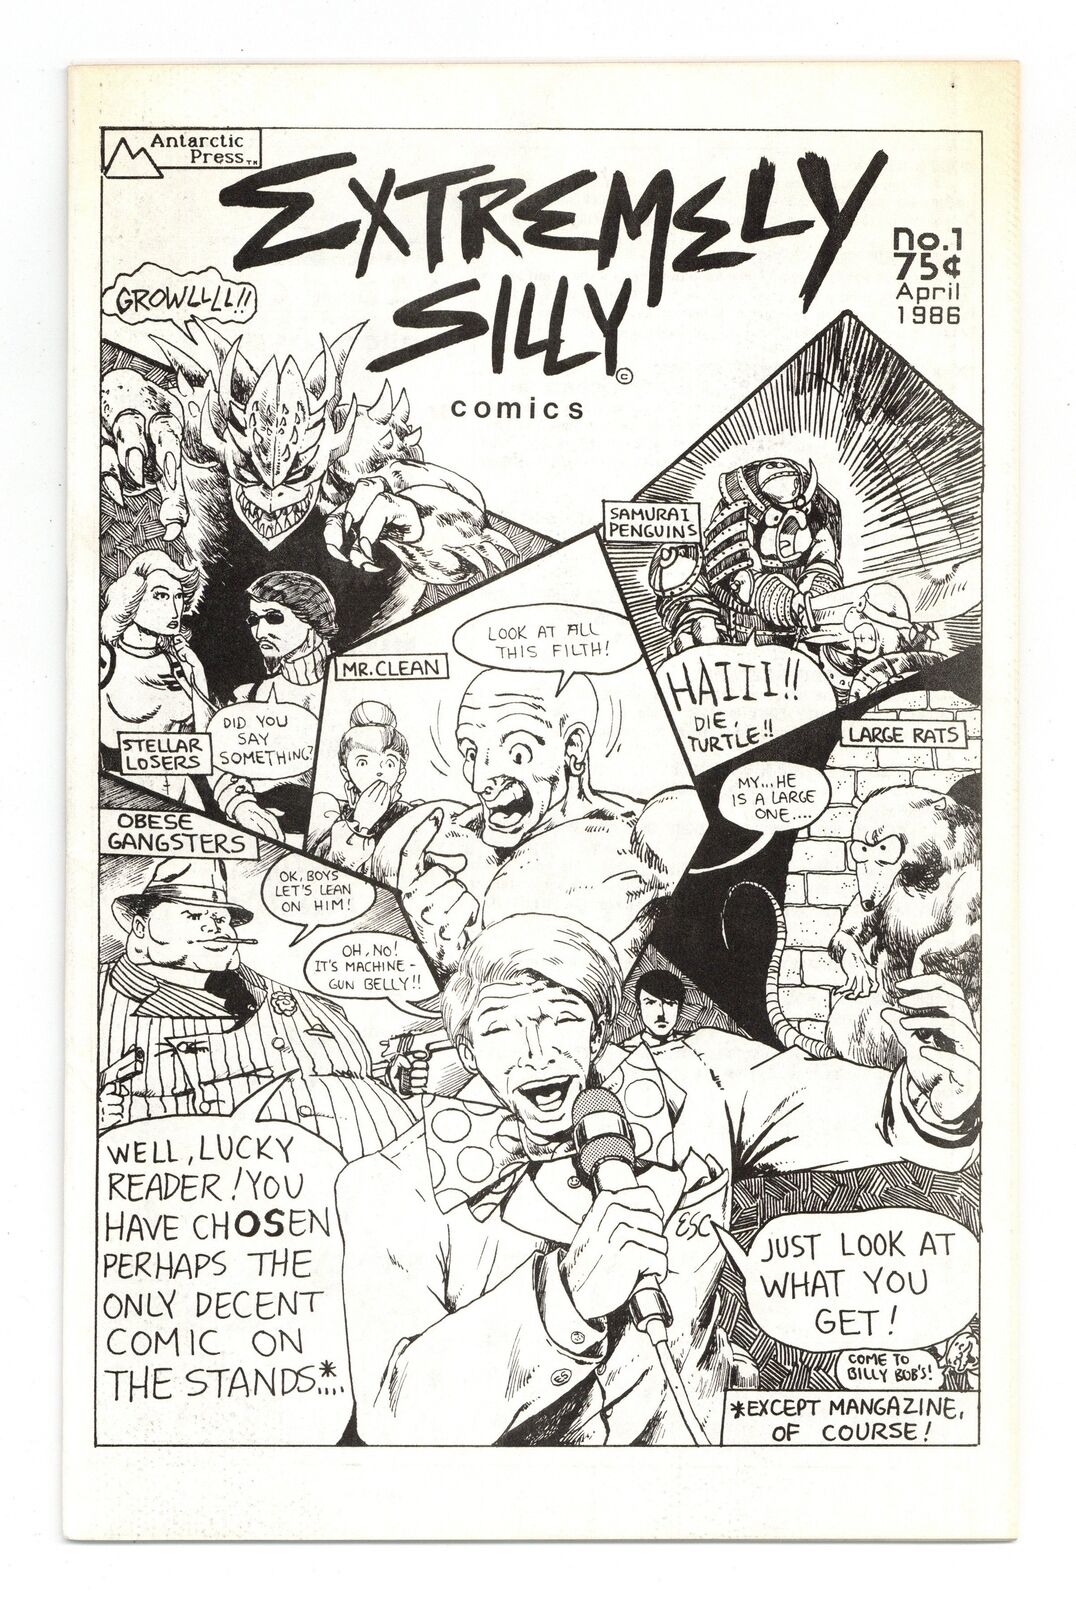 Extremely Silly Comics #1 VF 8.0 1986